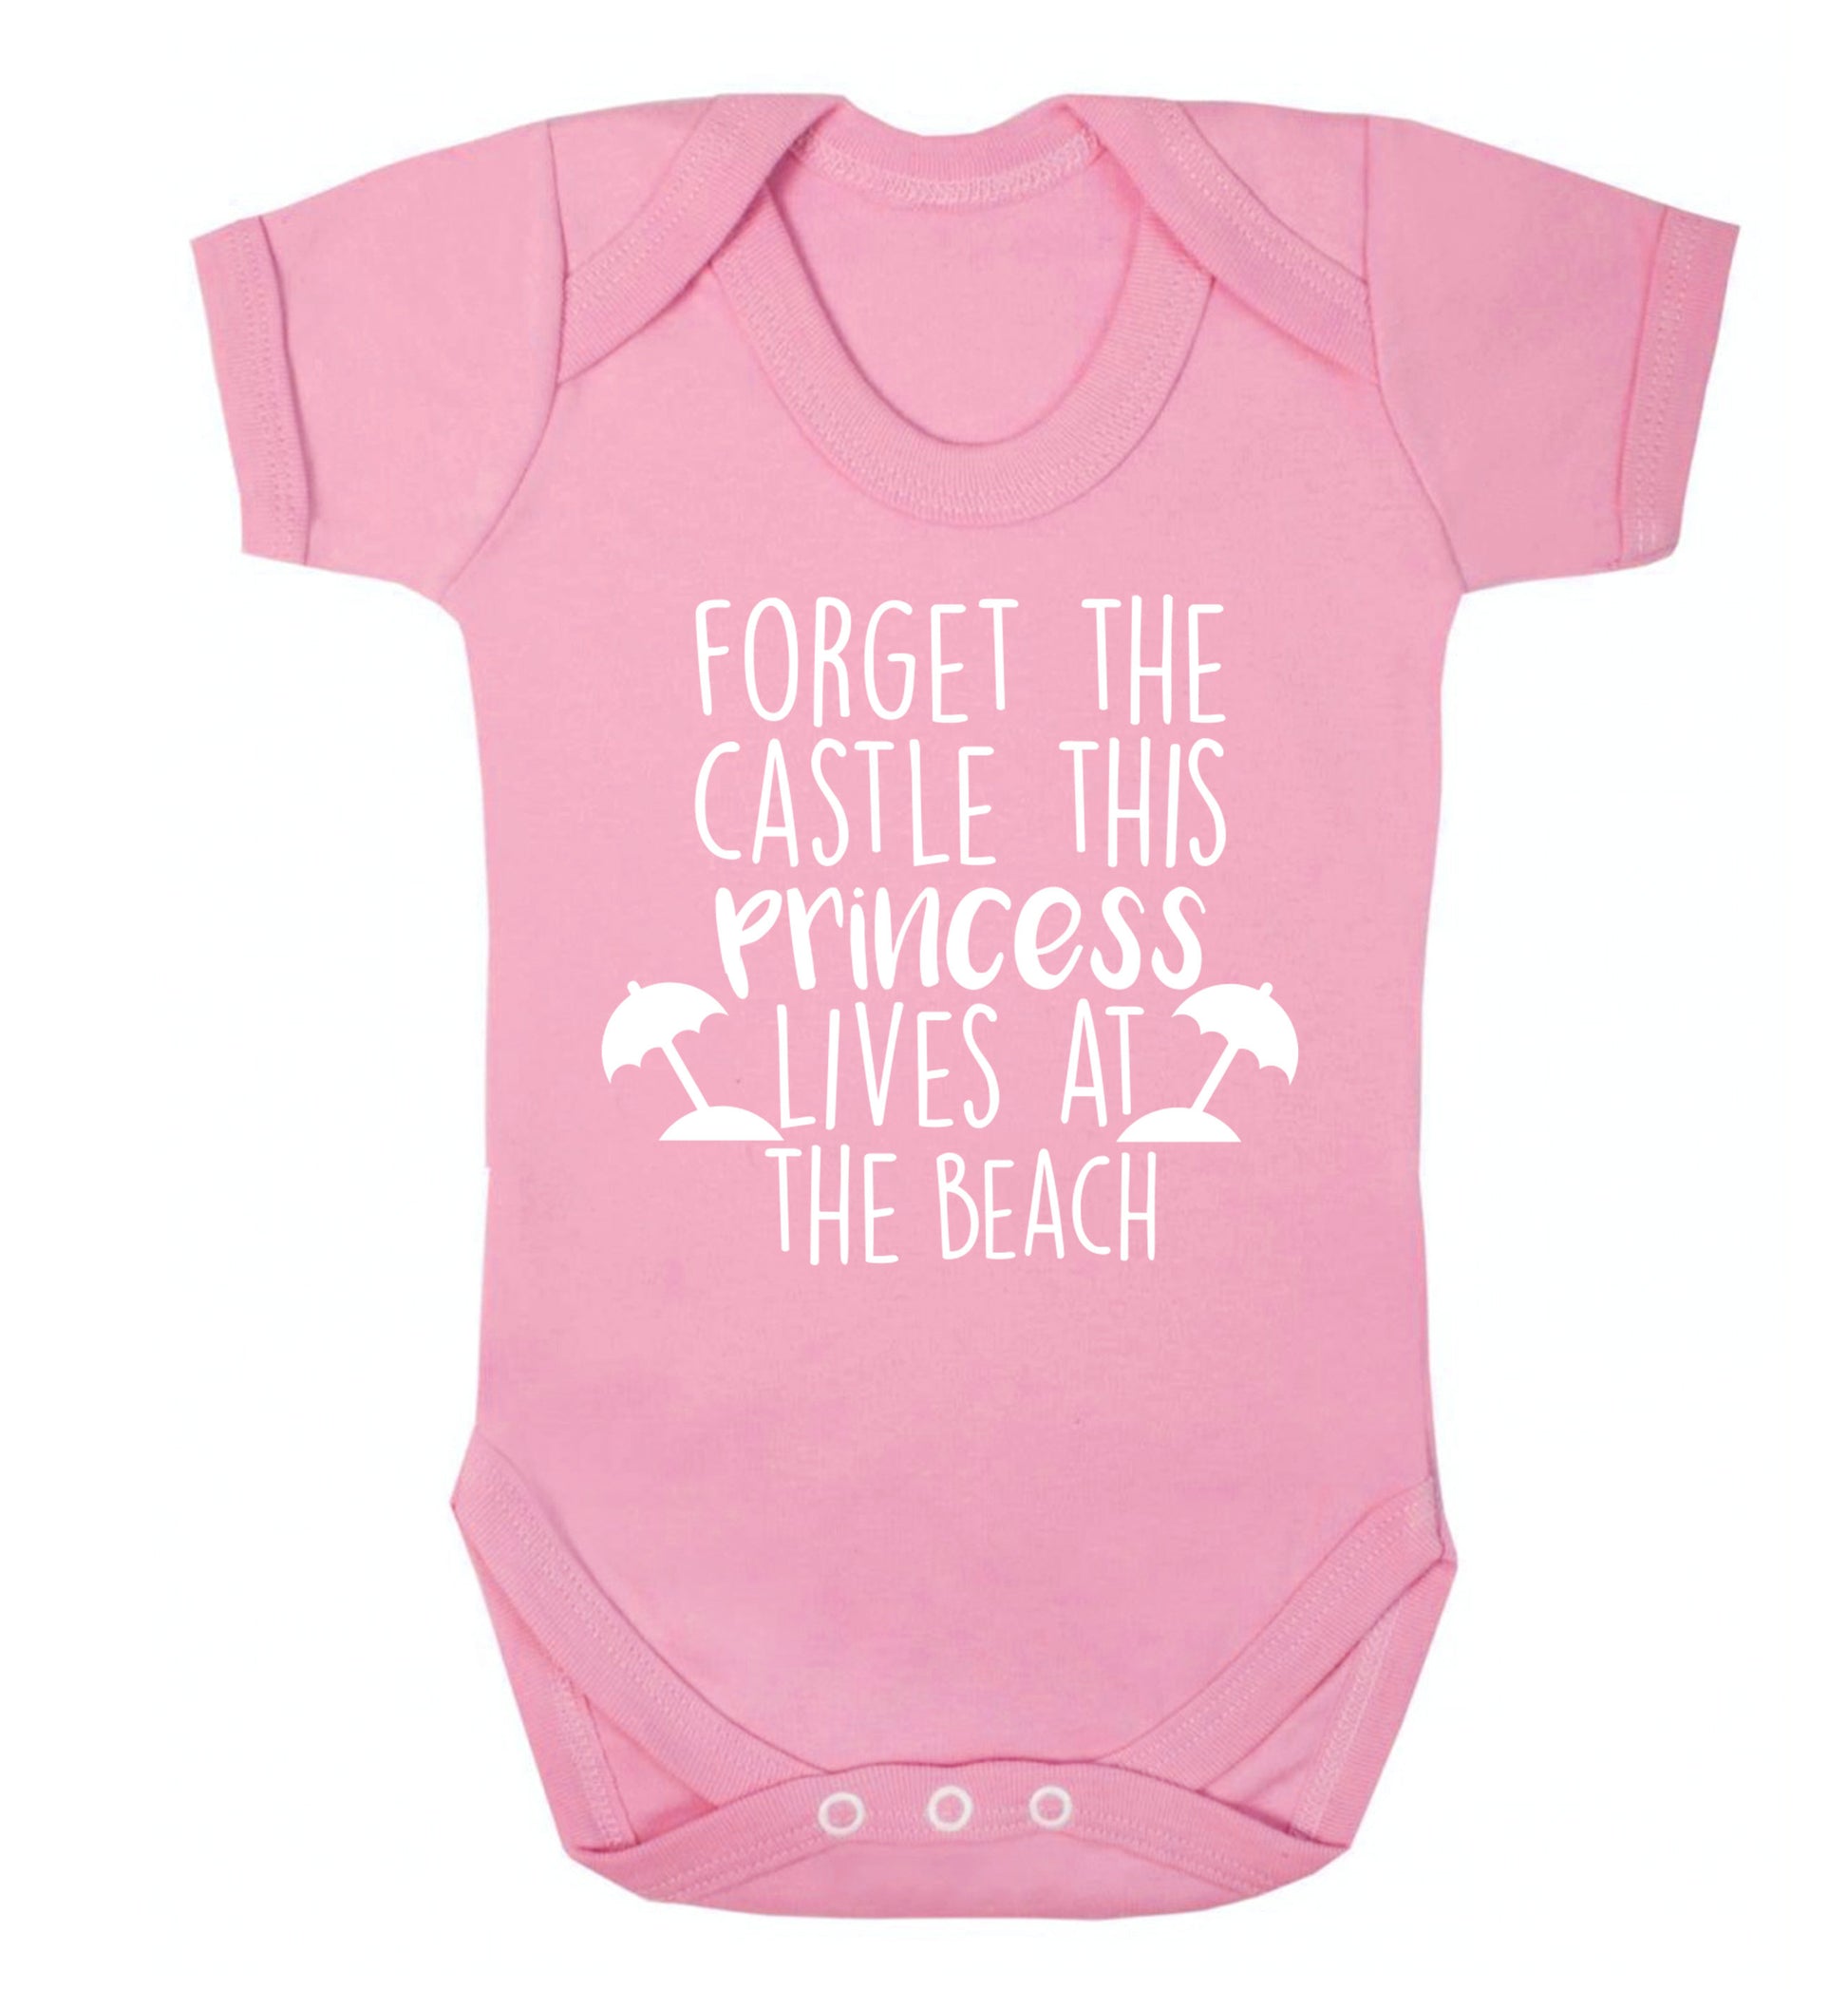 Forget the castle this princess lives at the beach Baby Vest pale pink 18-24 months